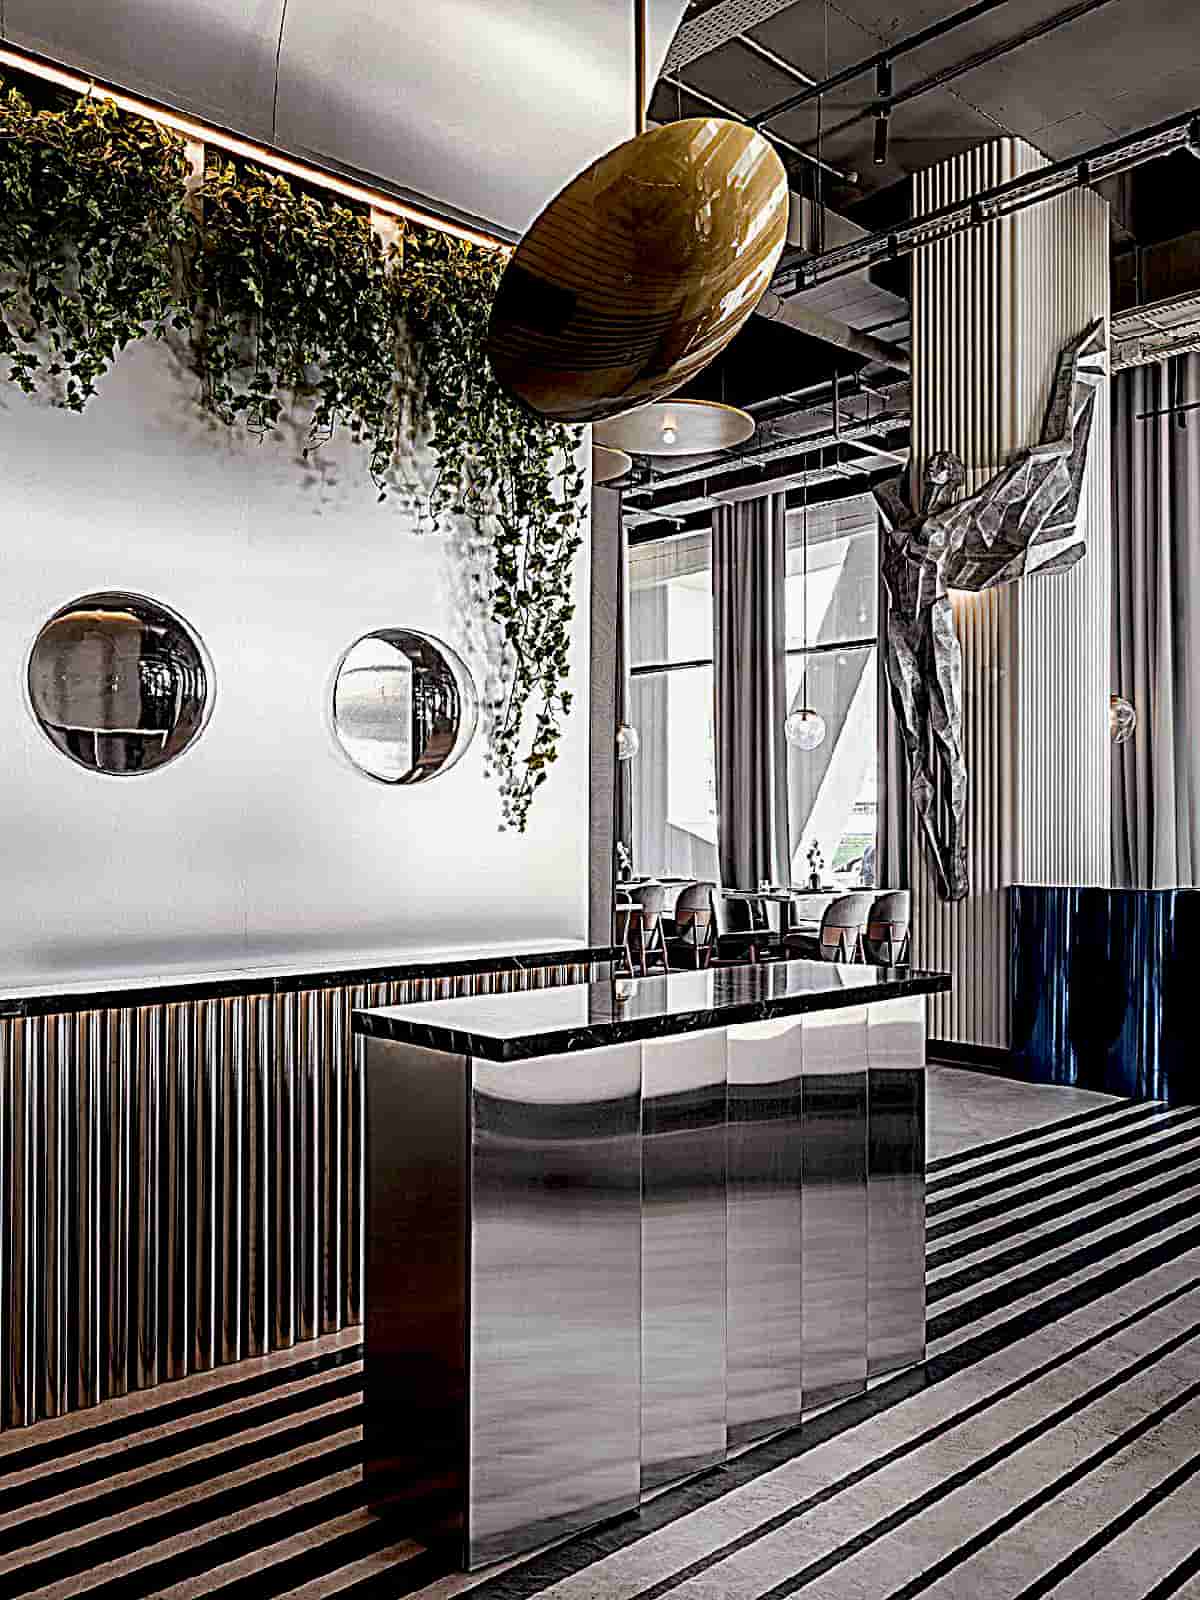 Café Polet that channels the site’s illustrious aviation history with a retro-futuristic interior